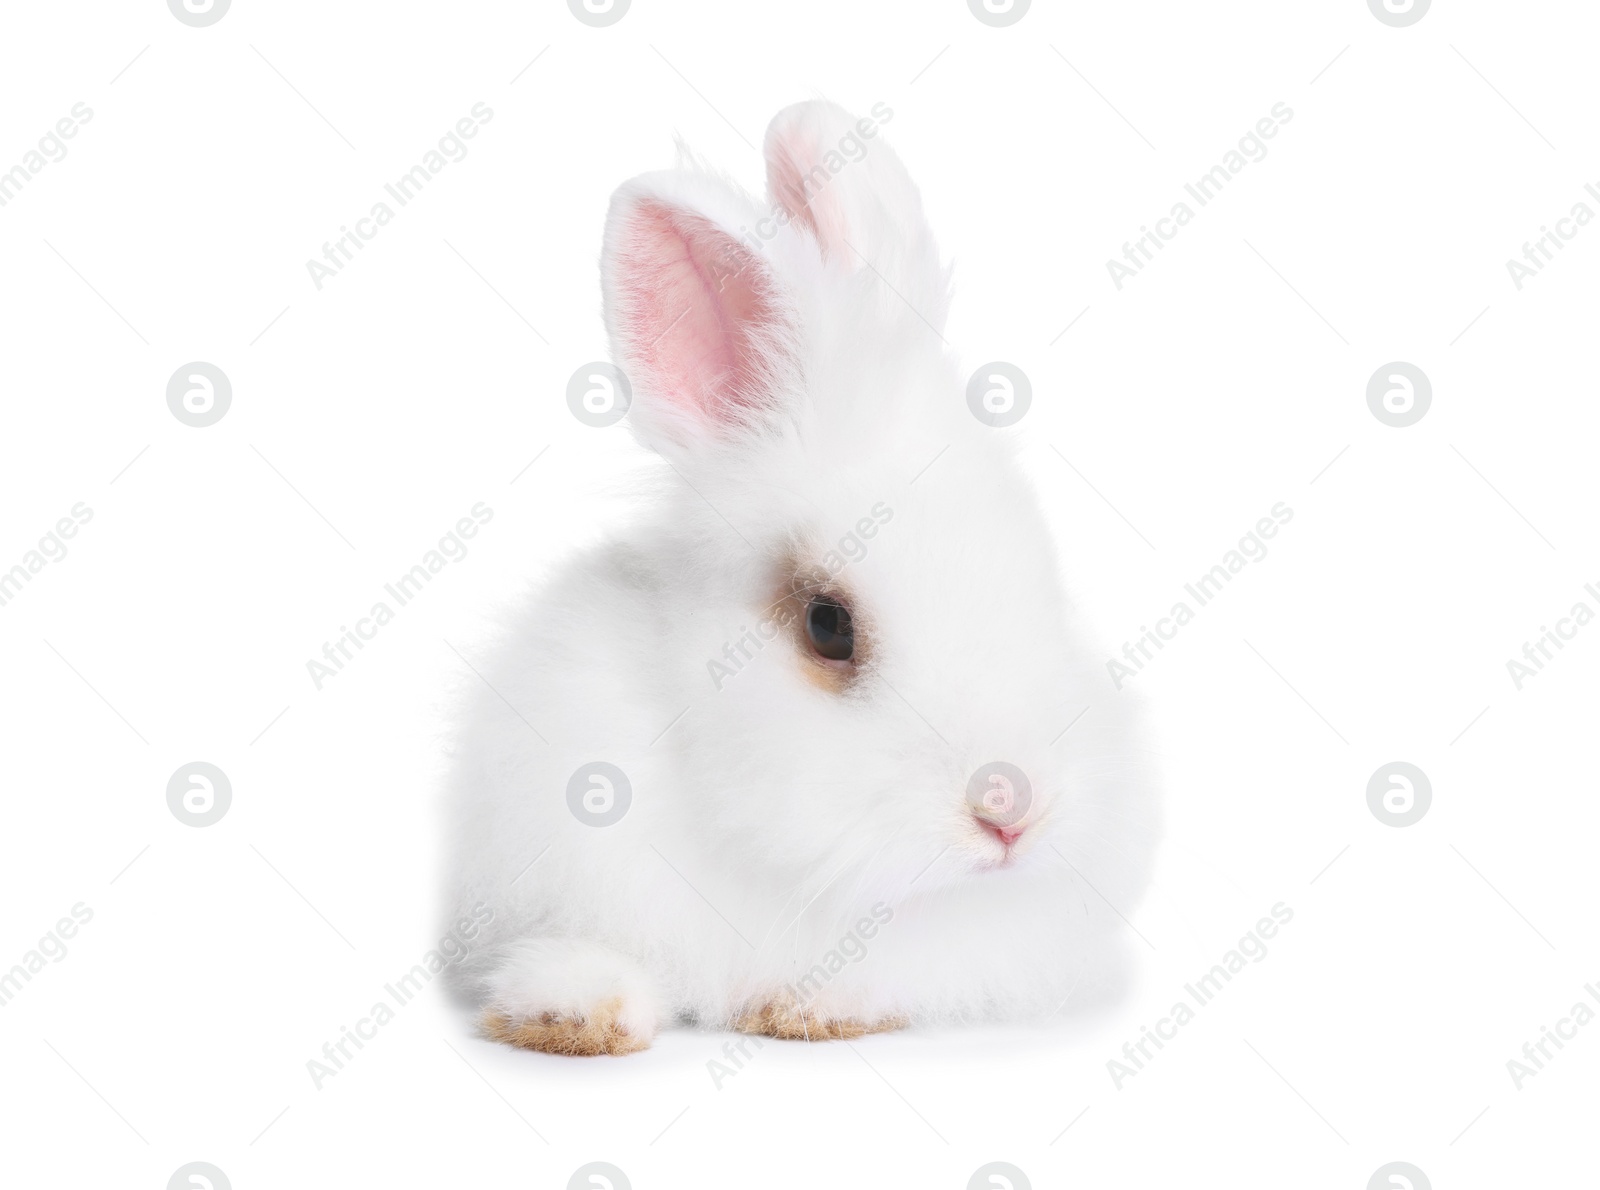 Photo of Fluffy rabbit on white background. Cute pet